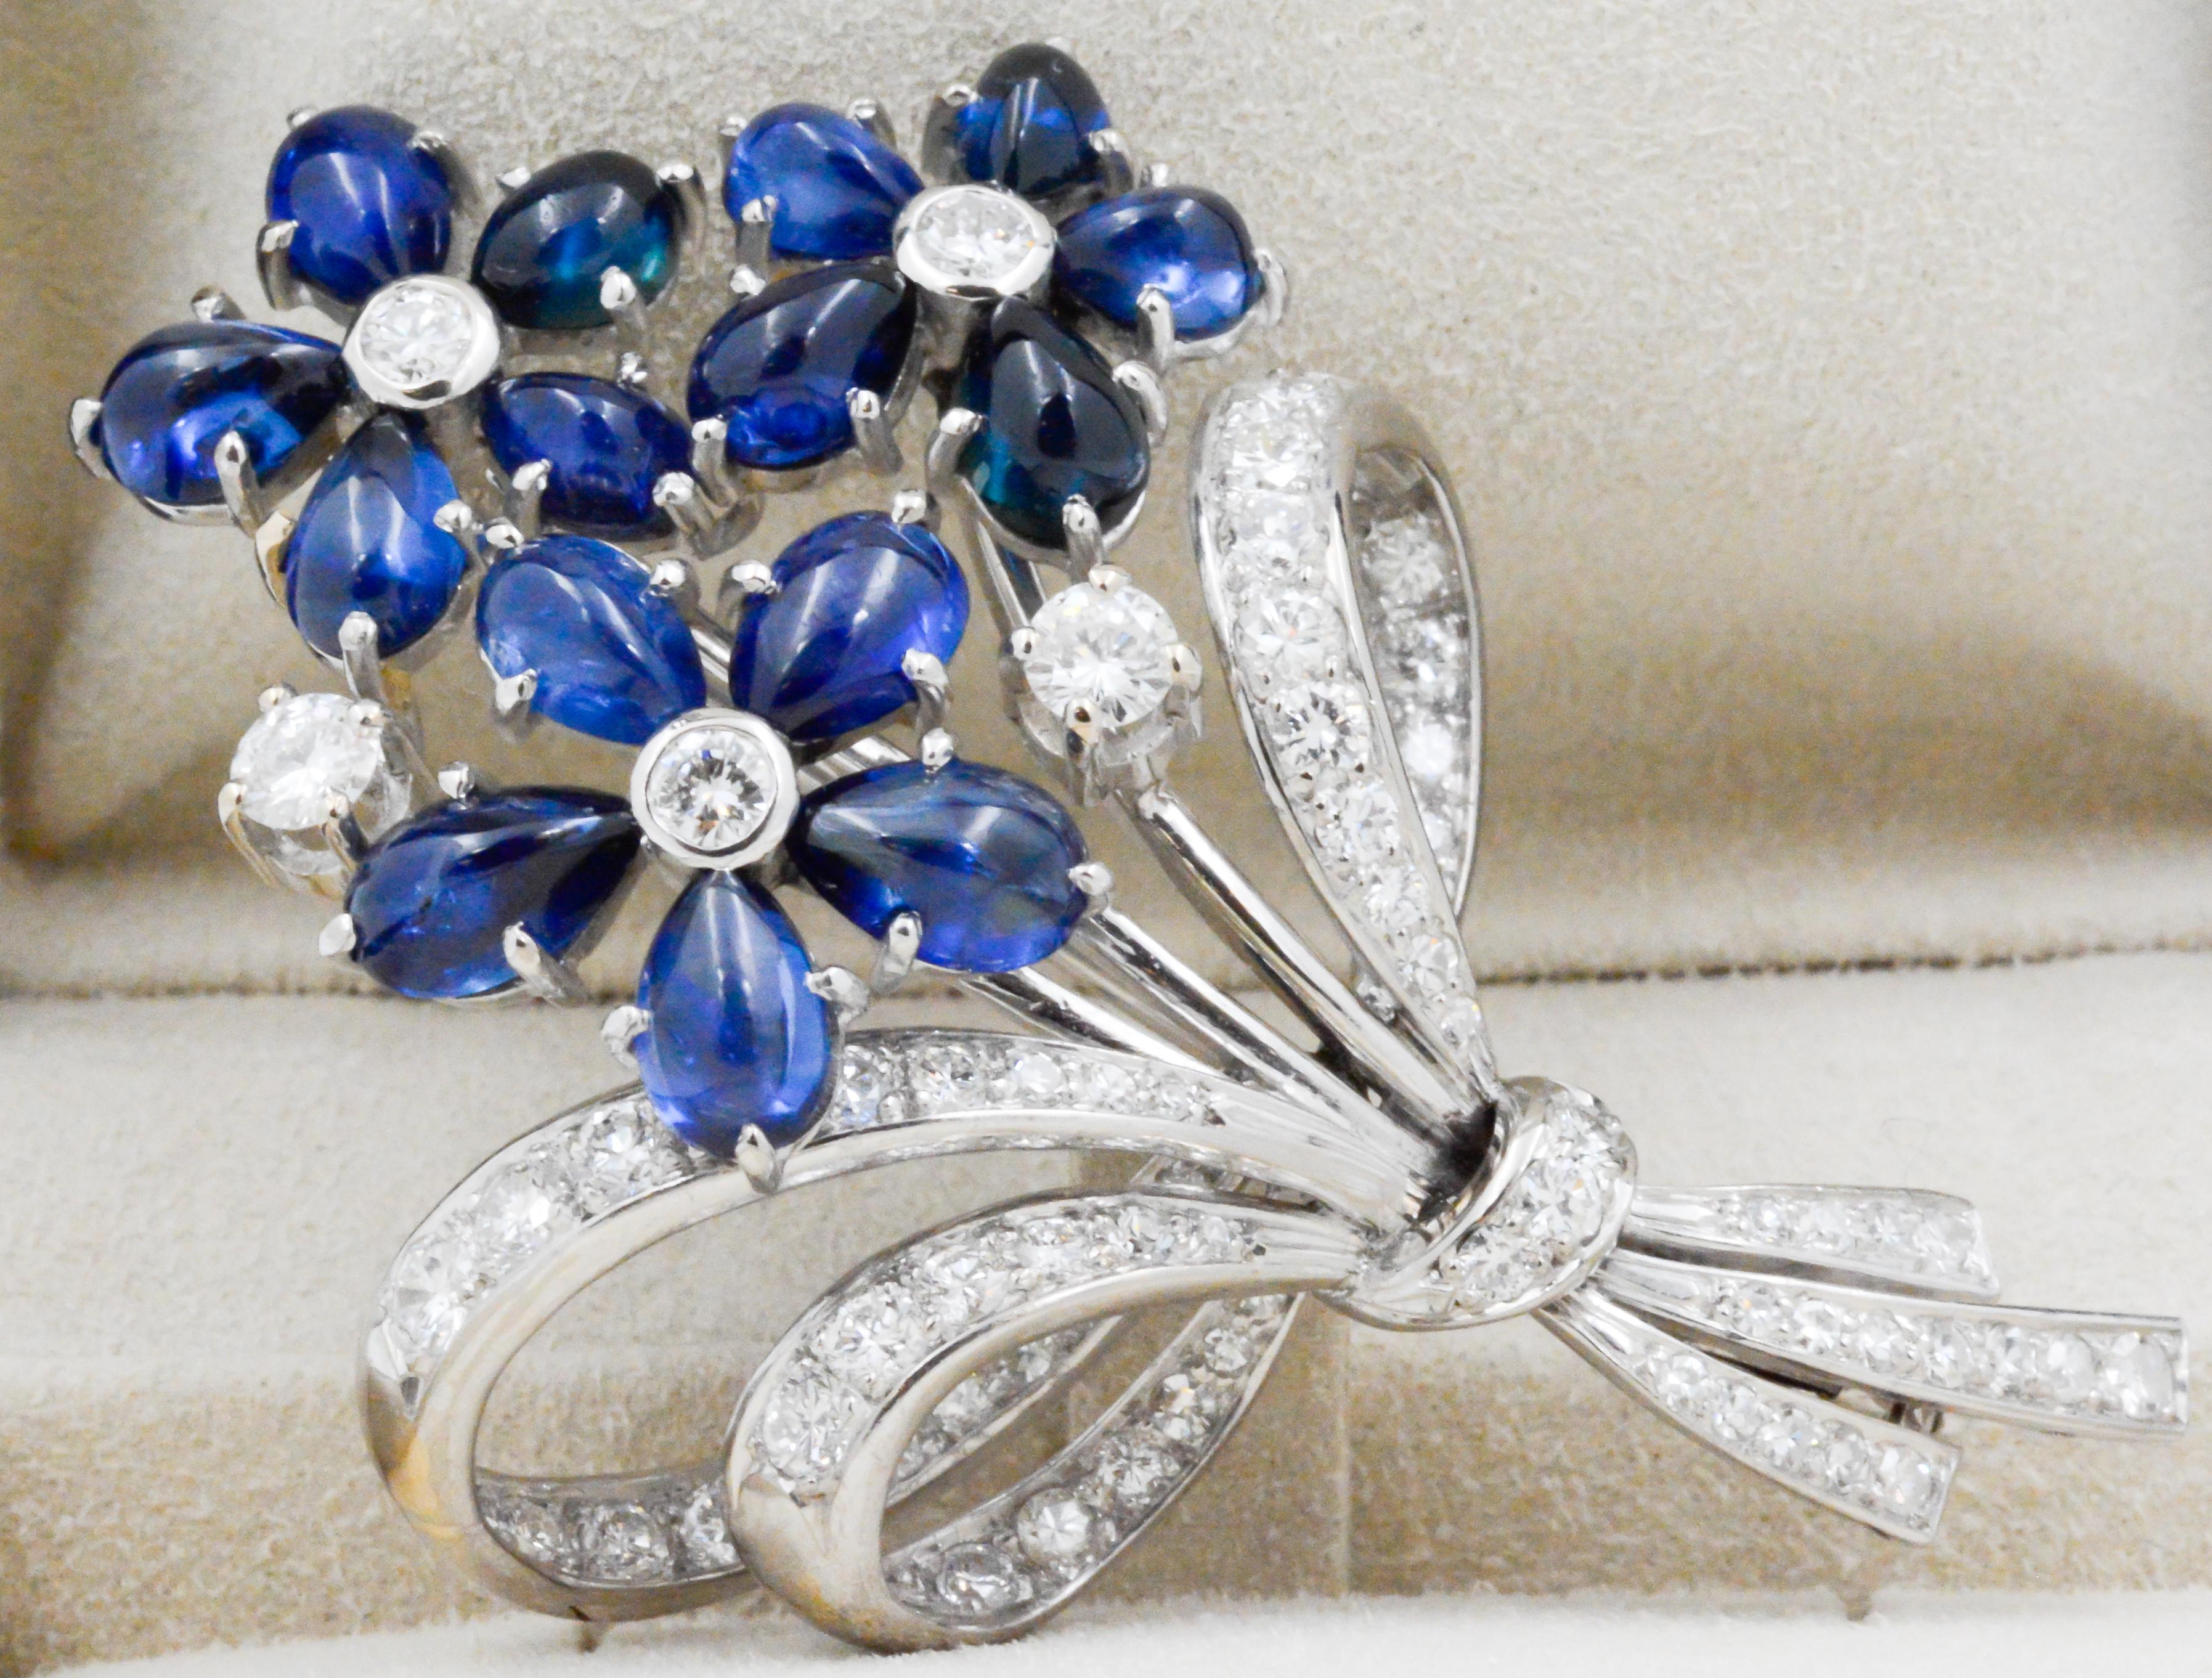 This Art Deco/Retro brooch showpieces deep blue sapphires in 3 flowers all tied up with a diamond bow. This creative brooch is crafted in 18 karat white gold. The artist used 67 transition, single and round brilliant cut diamonds (2.50 carat total